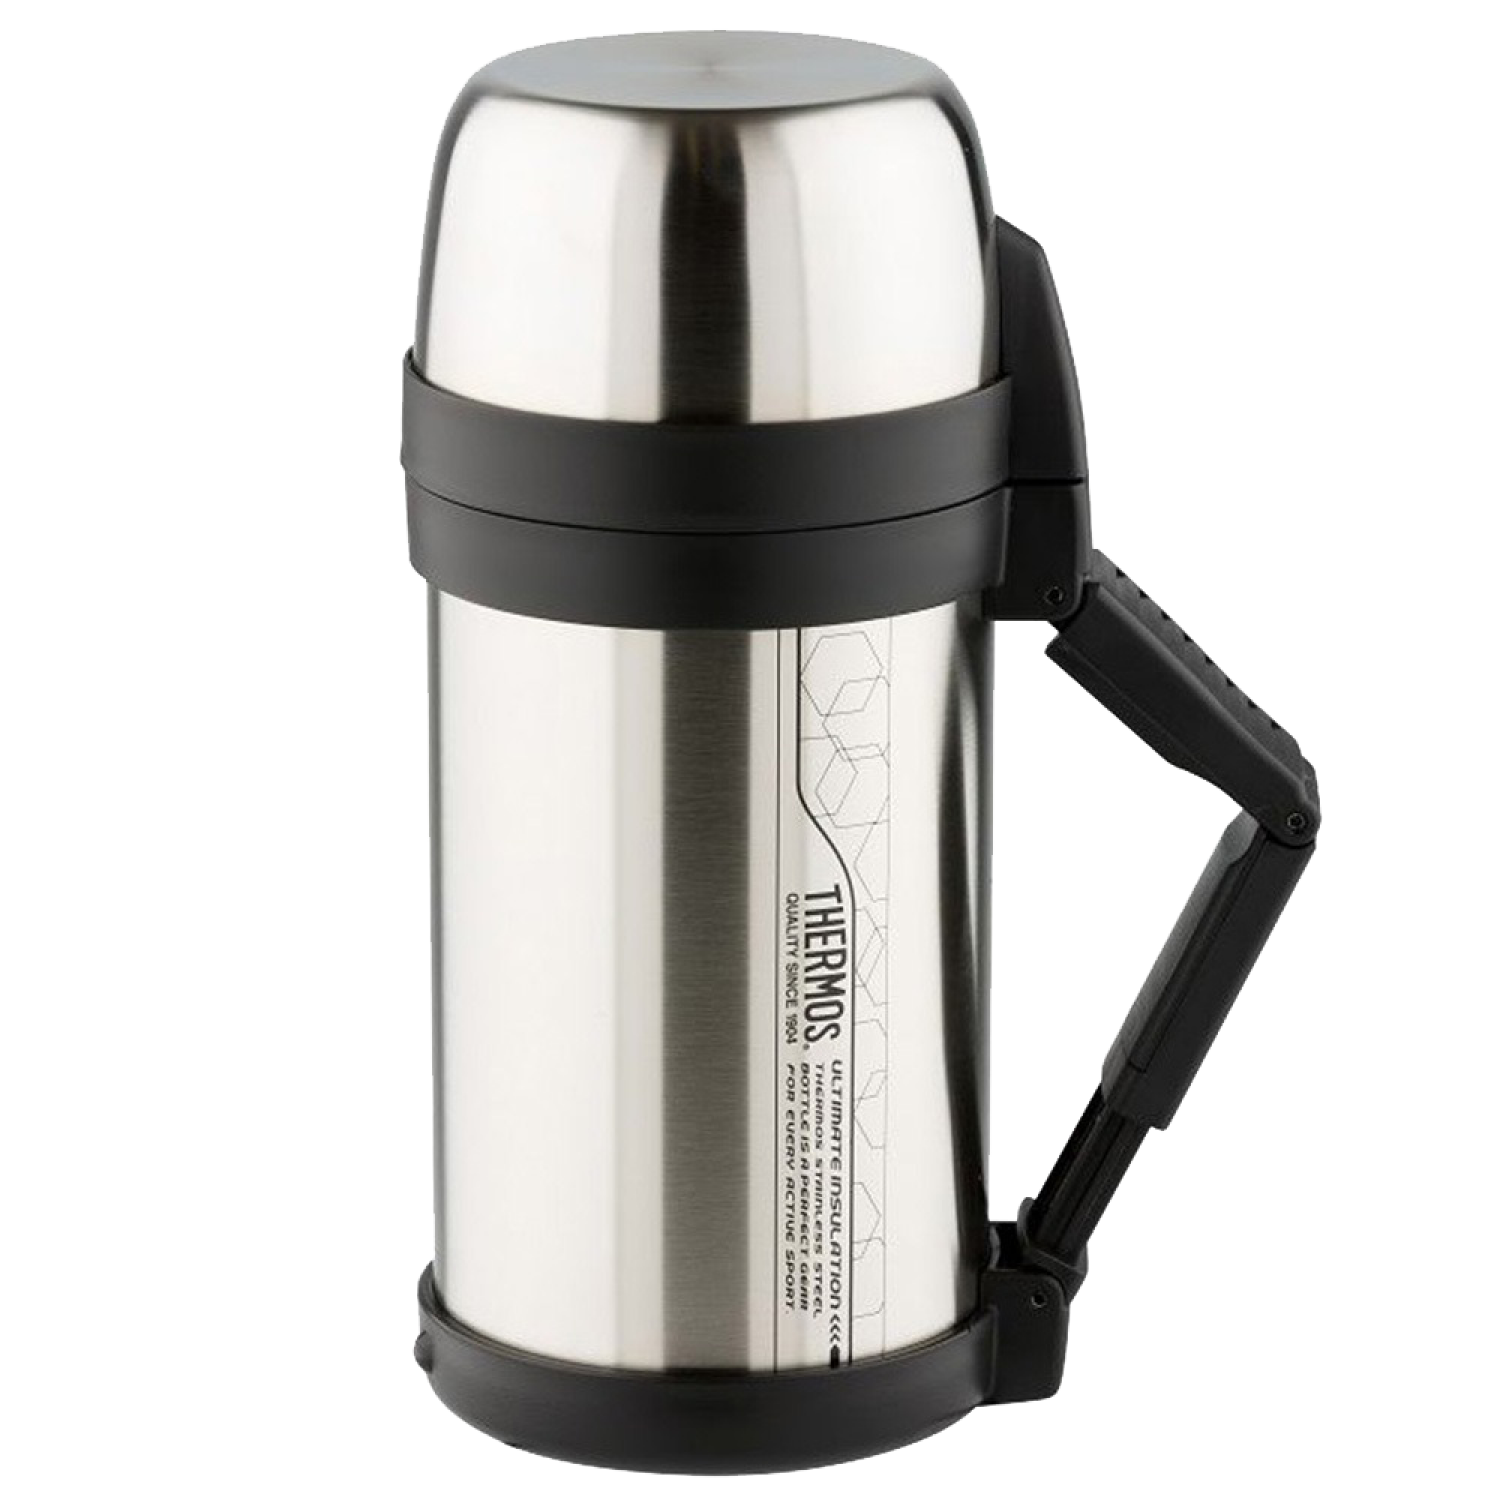 Термос Thermos FDH-1405 Stainless Steel 1,4л термос thermos fdh stainless steel vacuum flask 1 4l 923639